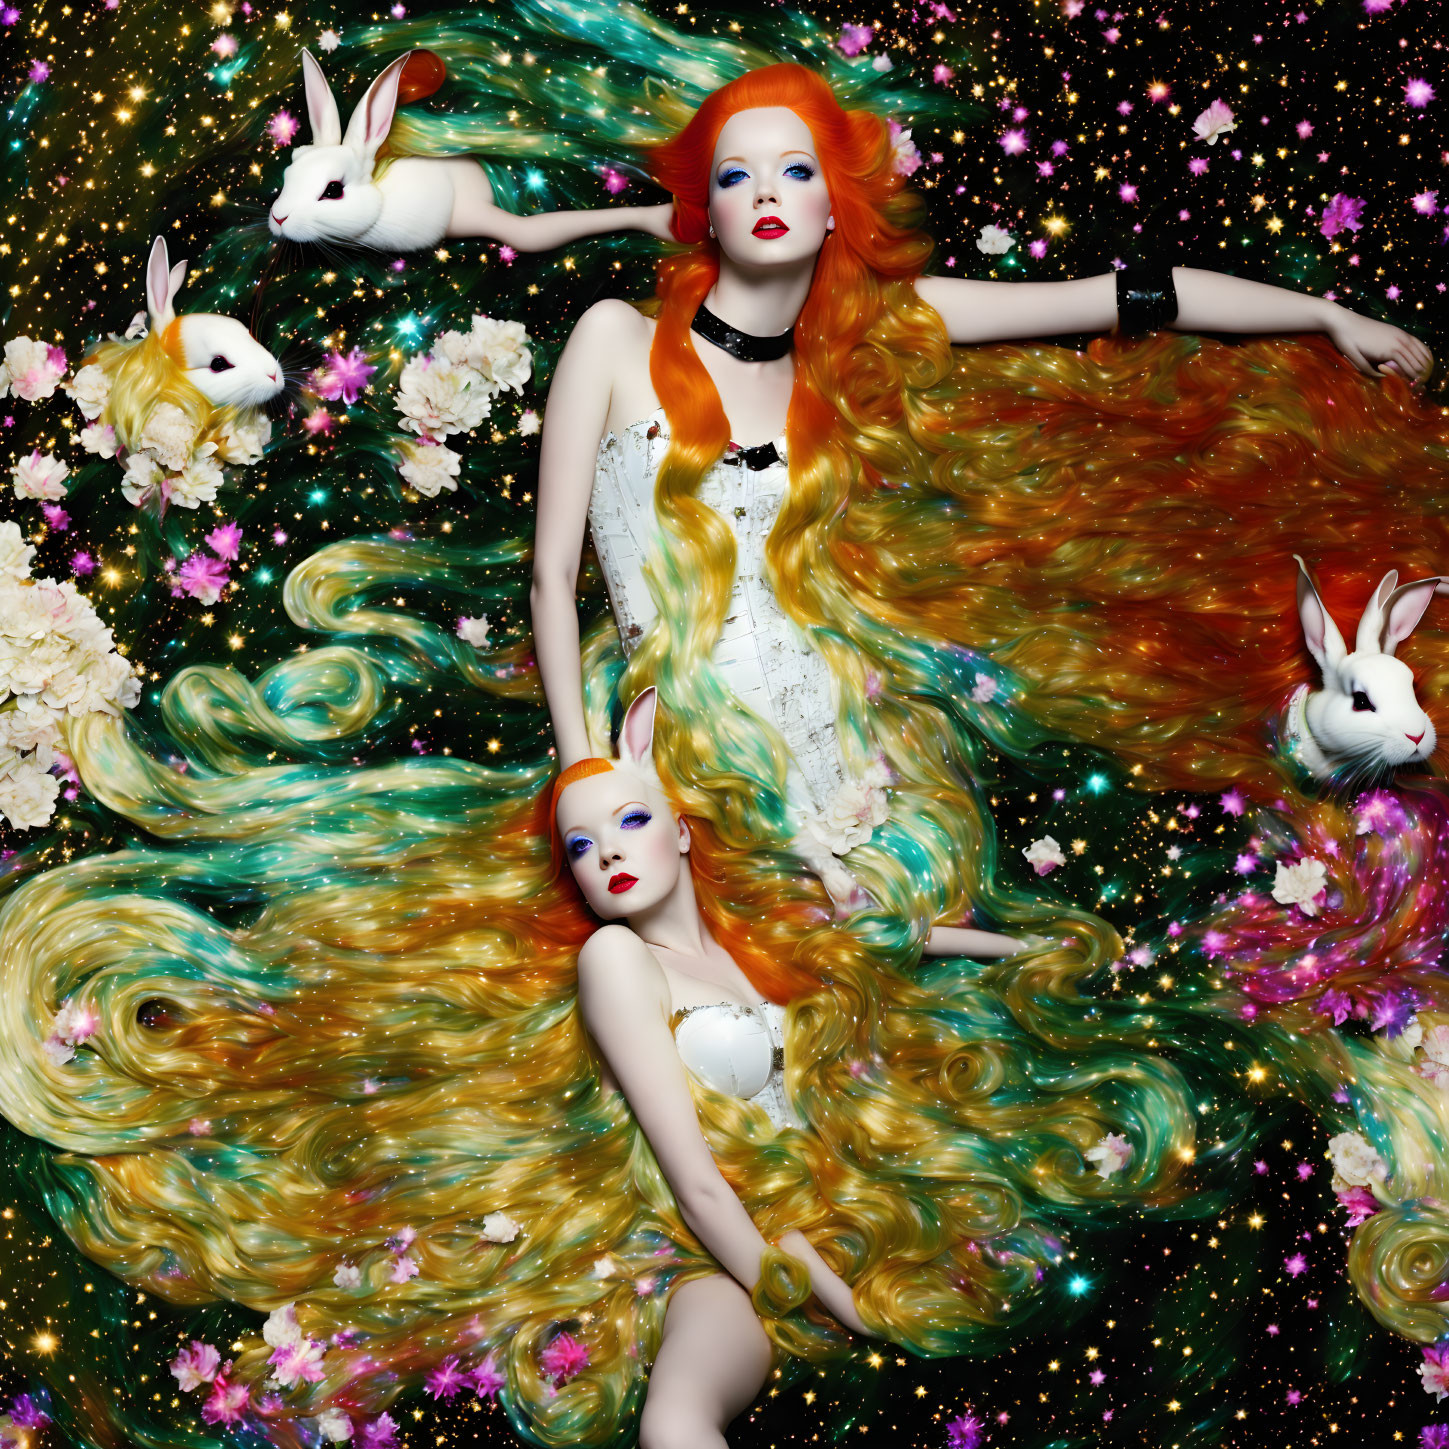 Fantasy image of two women with red hair, white rabbits, floral, and cosmic backgrounds